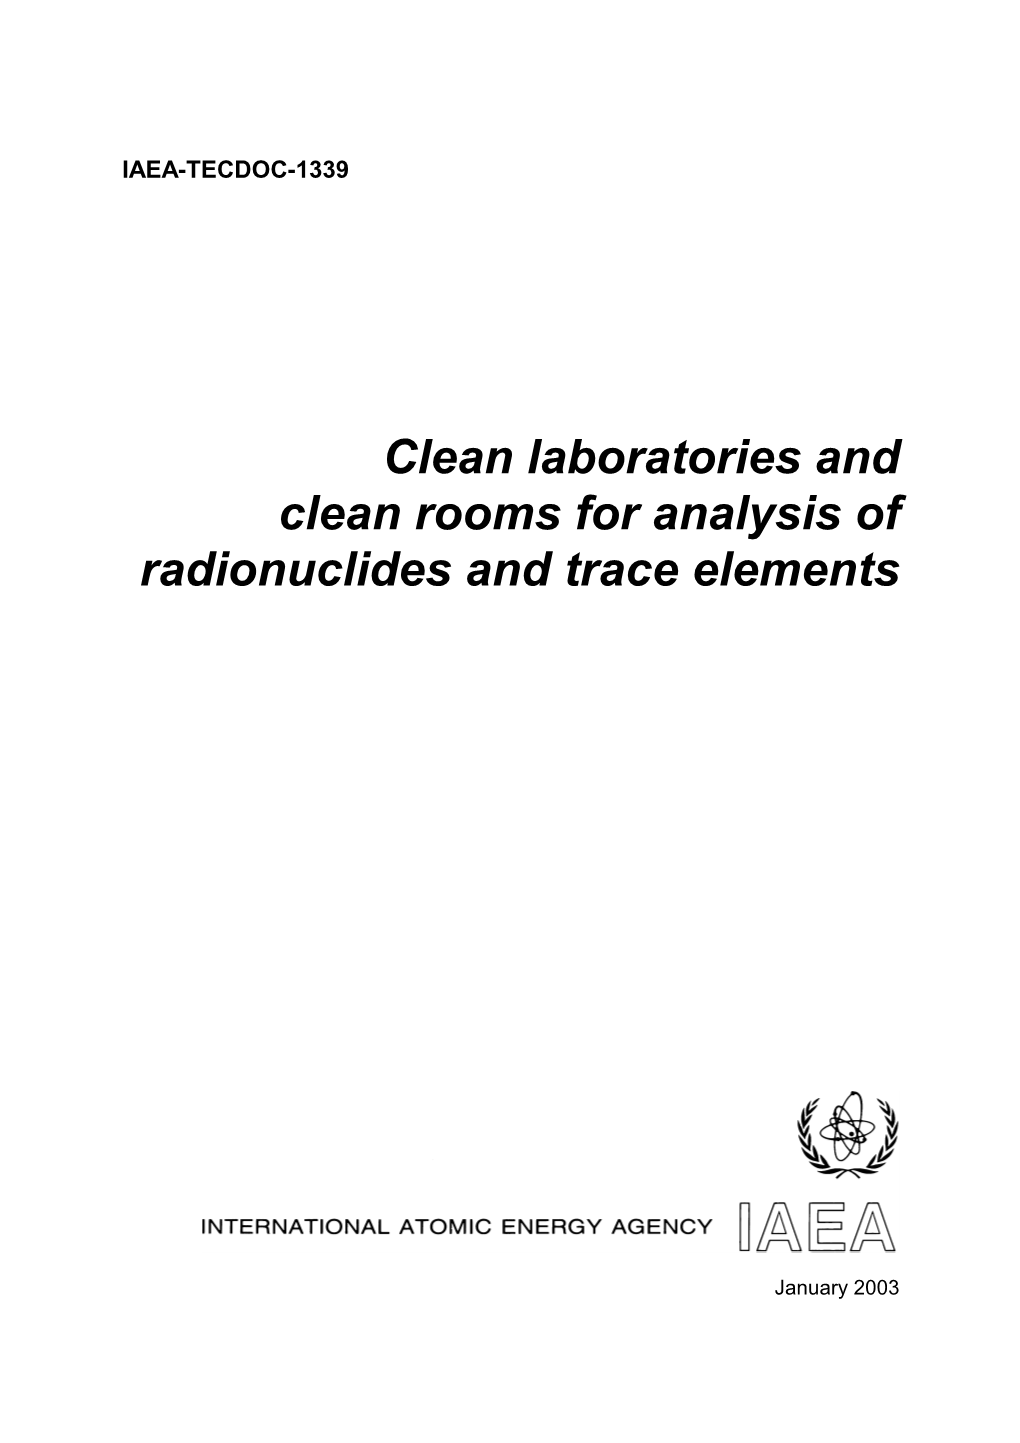 Clean Laboratories and Clean Rooms for Analysis of Radionuclides and Trace Elements